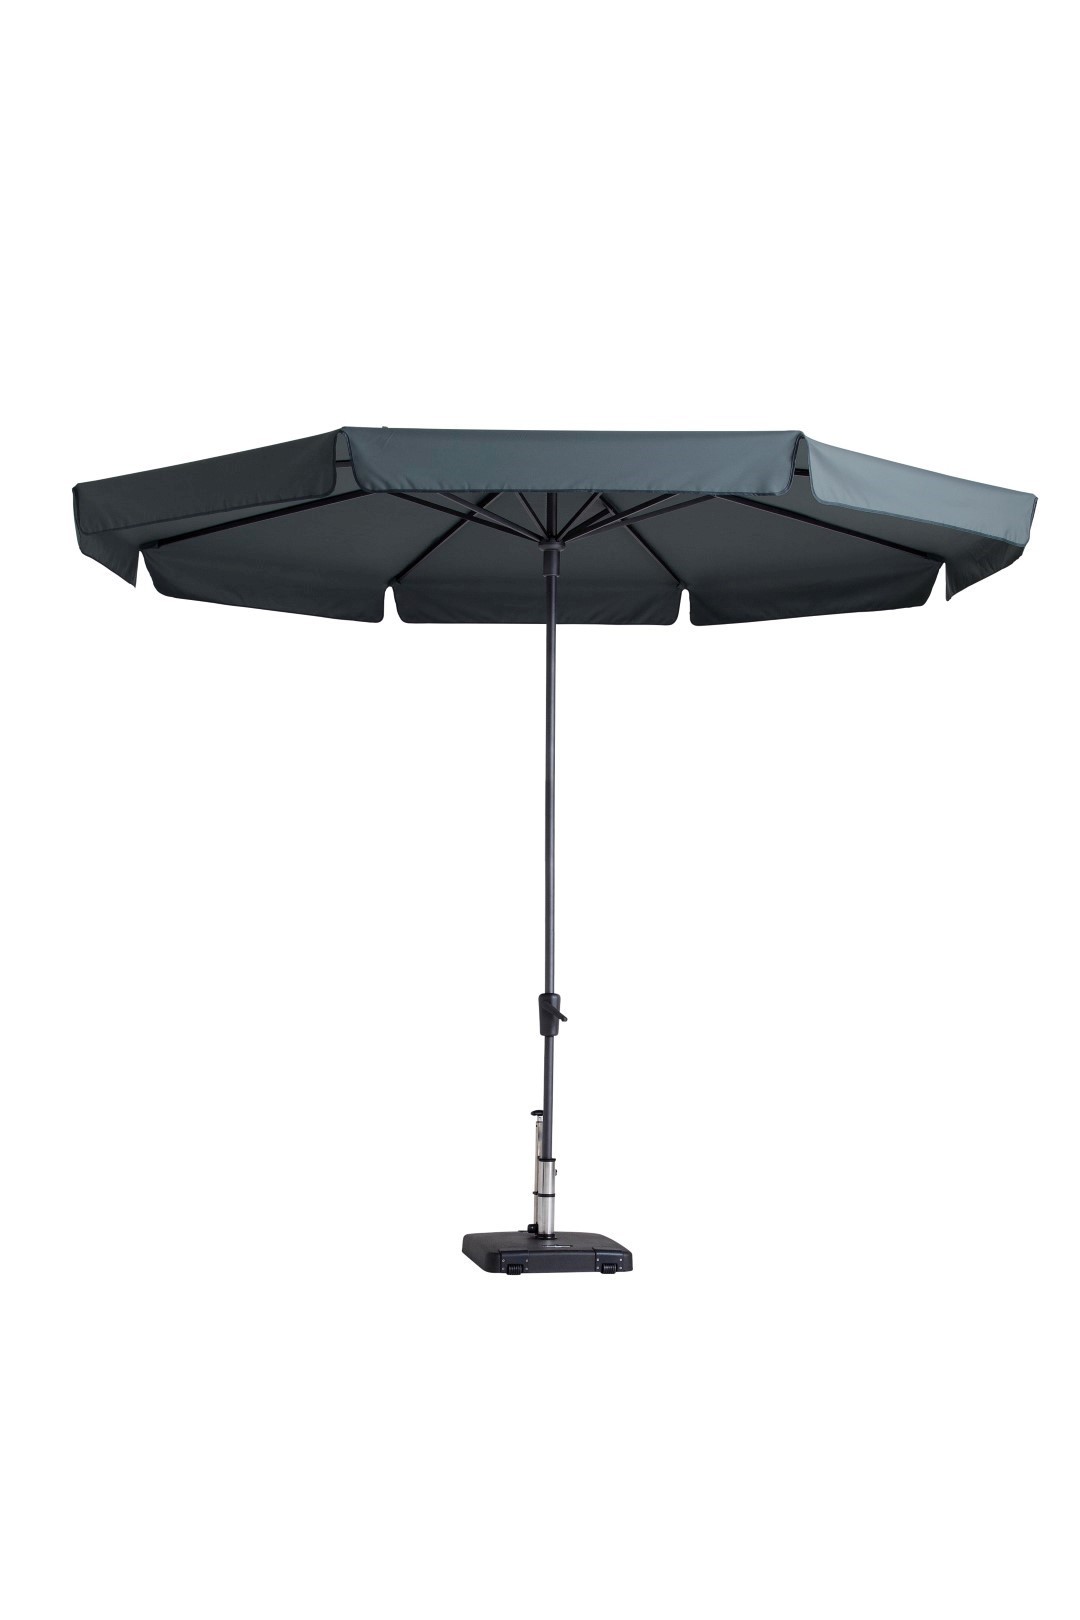 https://www.warentuin.nl/media/catalog/product/S/C/SCAN8713229247621_madison_parasol_syros_luxe_350_cm_polyester_grey_madison_502d.jpg